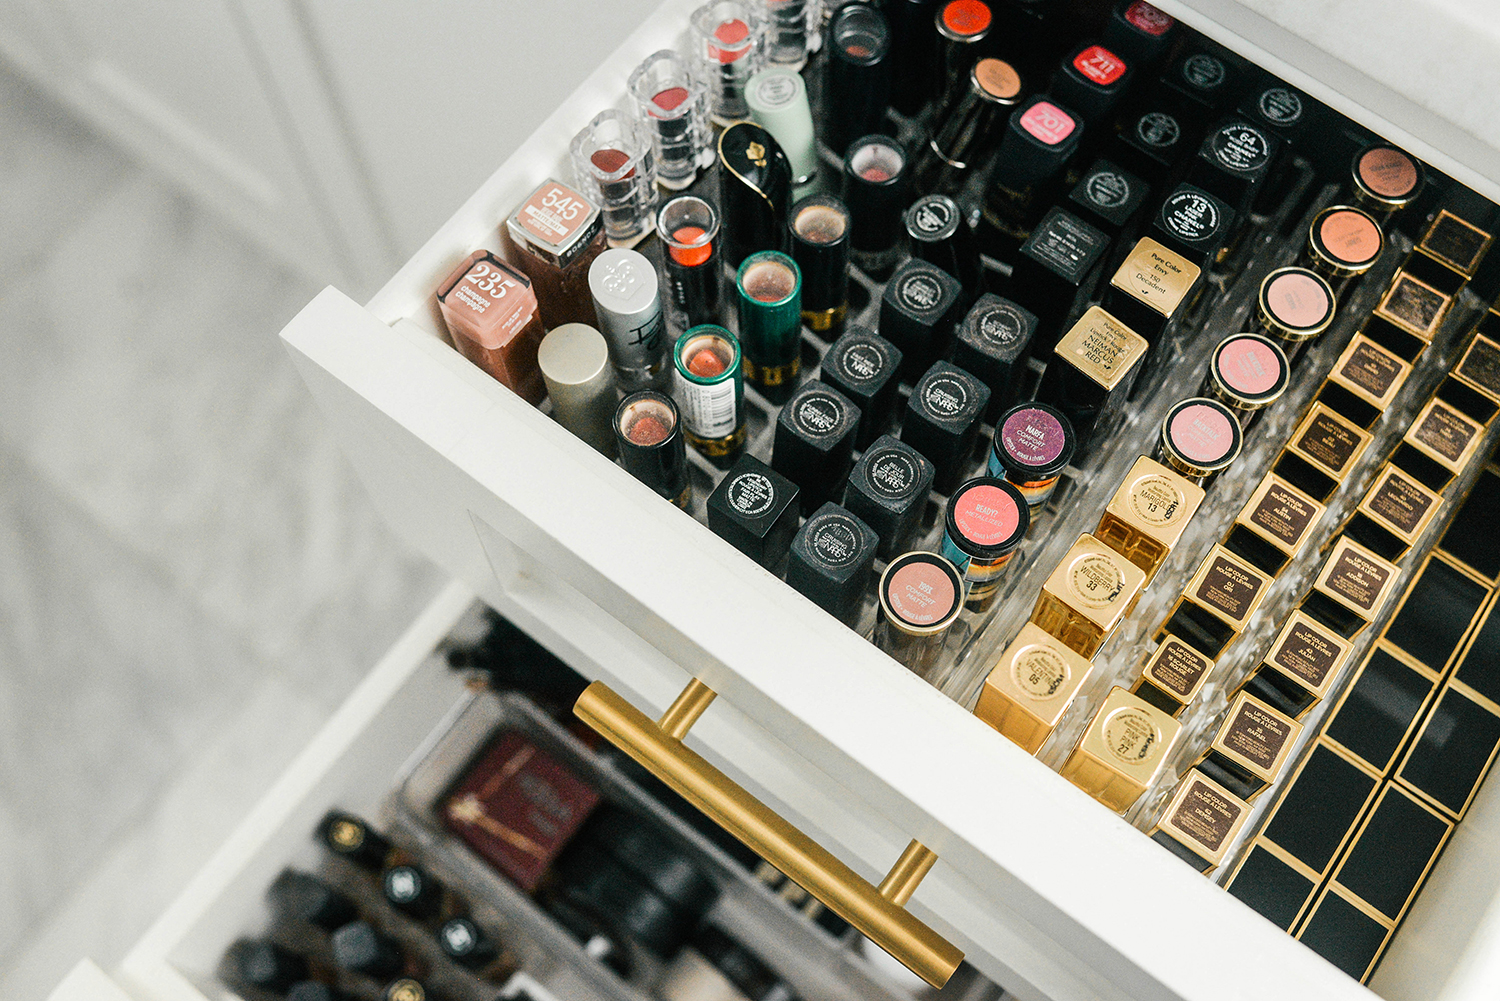 Best Tips for Organizing your Beauty Products and Makeup